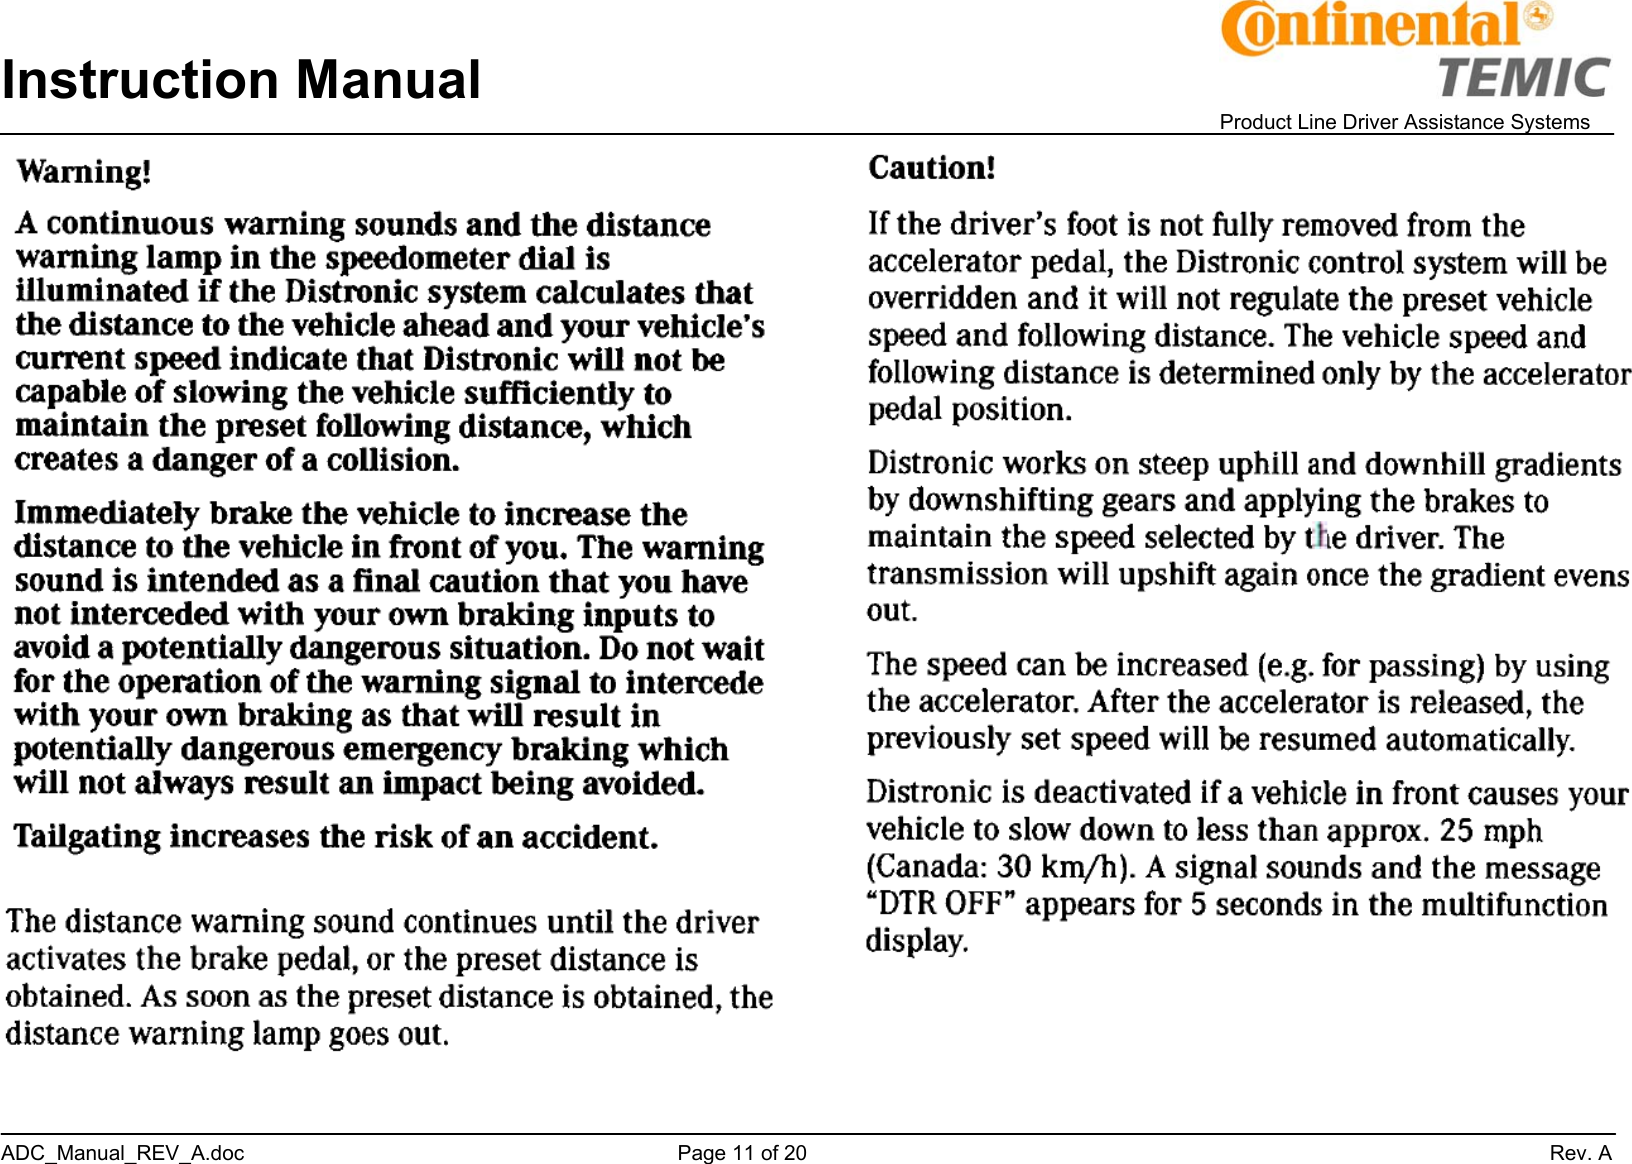 Instruction Manual    Product Line Driver Assistance Systems ADC_Manual_REV_A.doc     Page 11 of 20                 Rev. A   